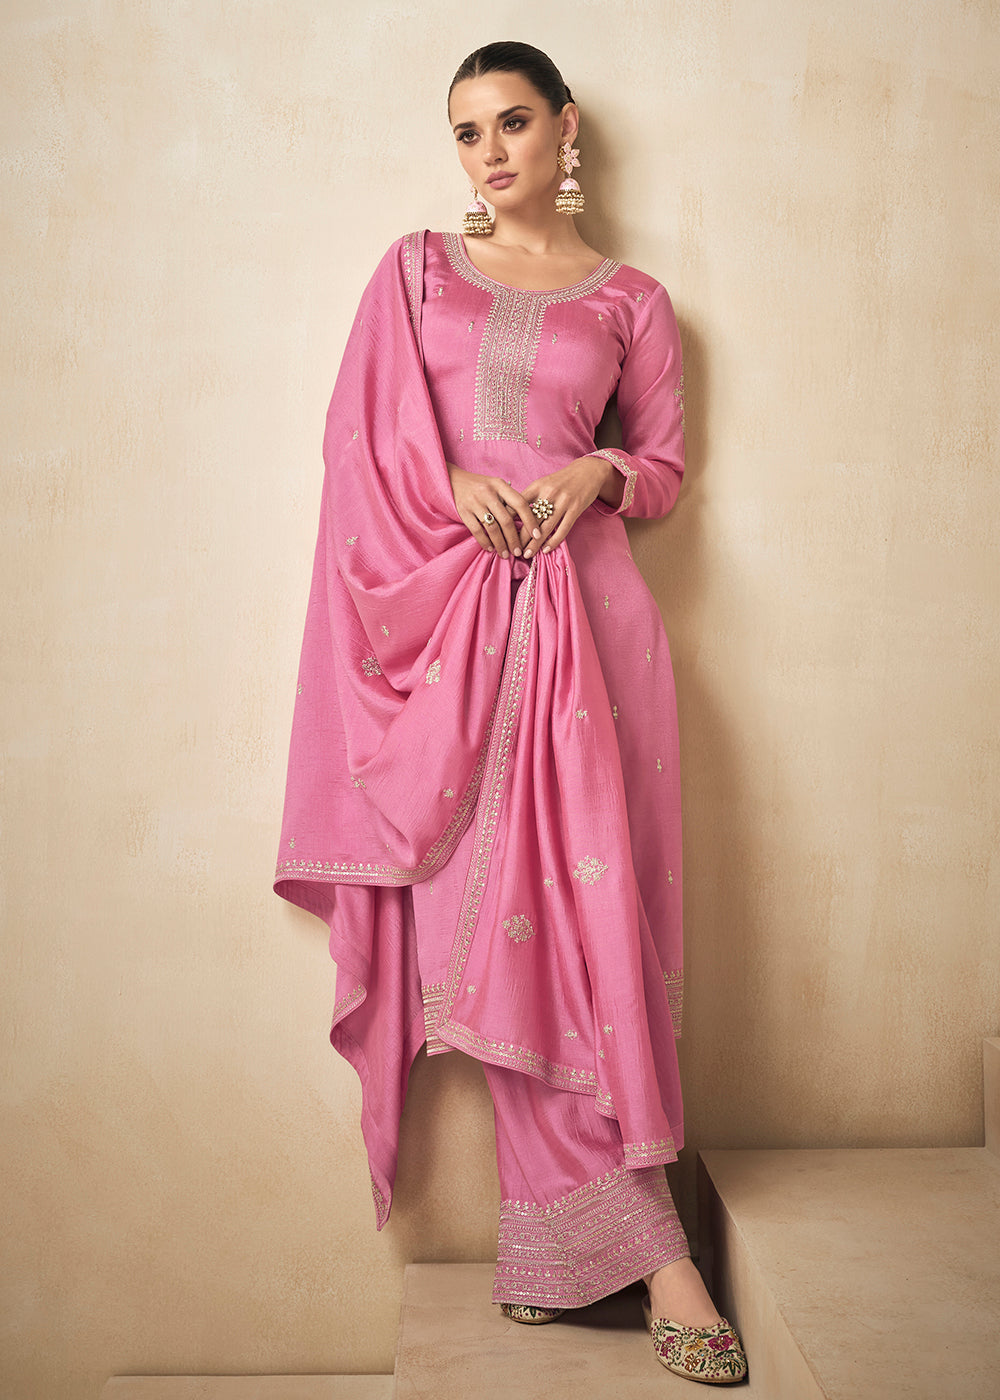 Buy Now Premium Silk Pretty Pink Embroidered Straight Palazzo Salwar Suit Online in USA, UK, Canada, Germany, Australia & Worldwide at Empress Clothing. 